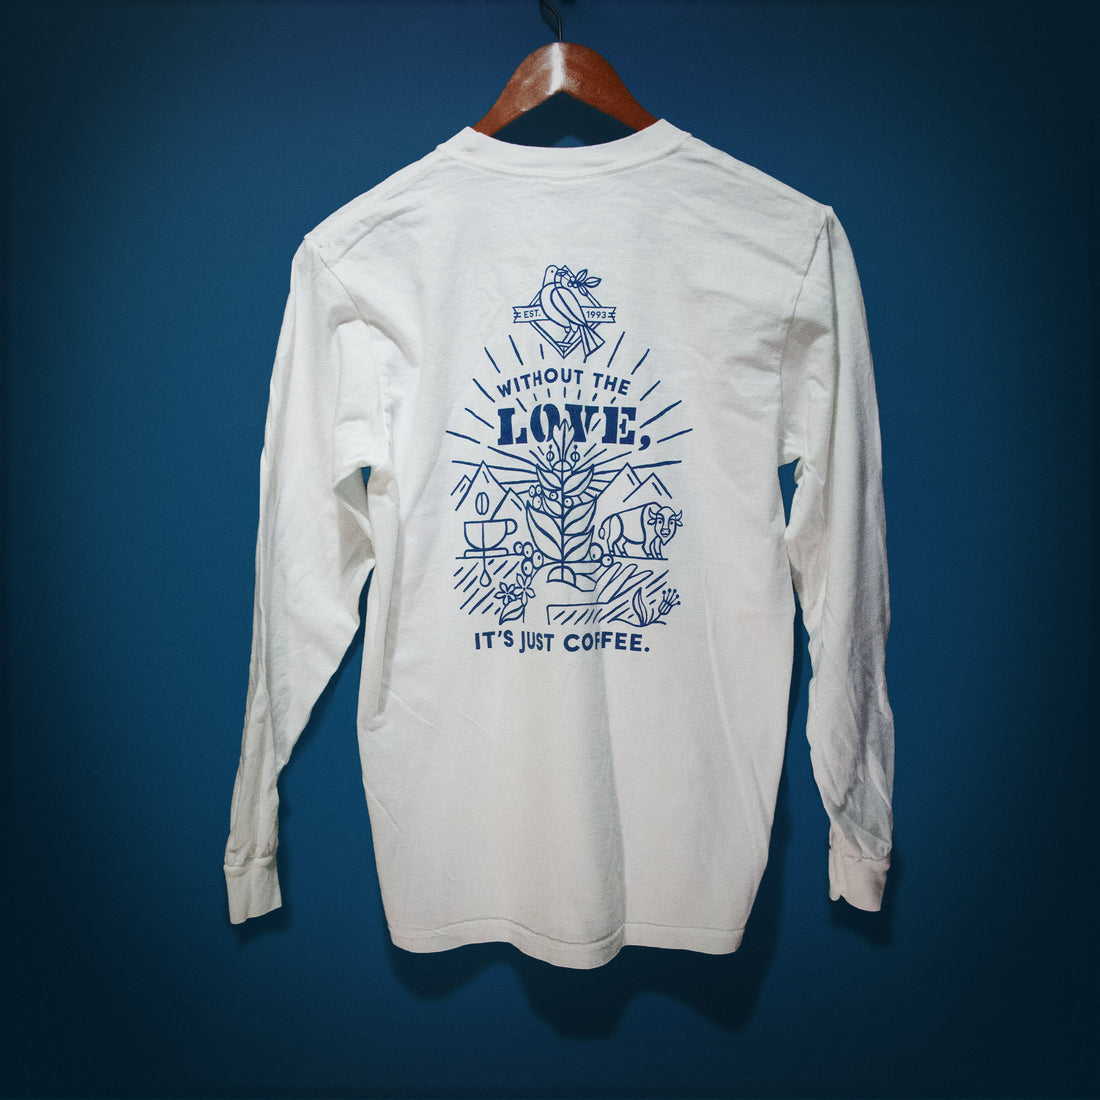 "Without the Love" Long-Sleeve Tee